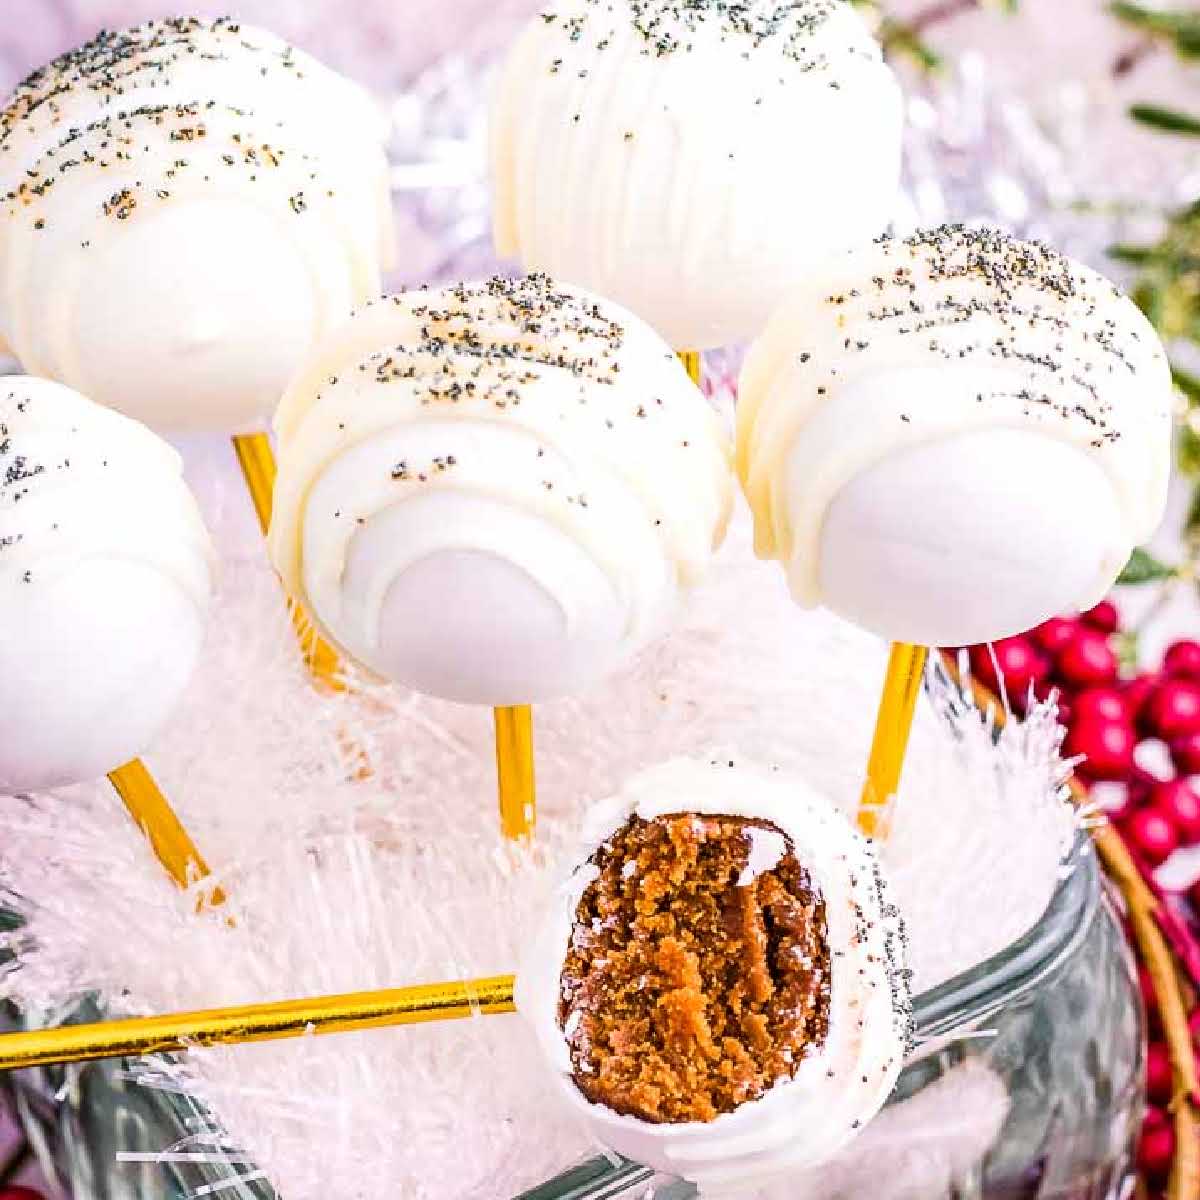 Closeup view of Gingerbread Cake Pops covered in white chocolate and decorated with sprinkles, with one with a bite removed.